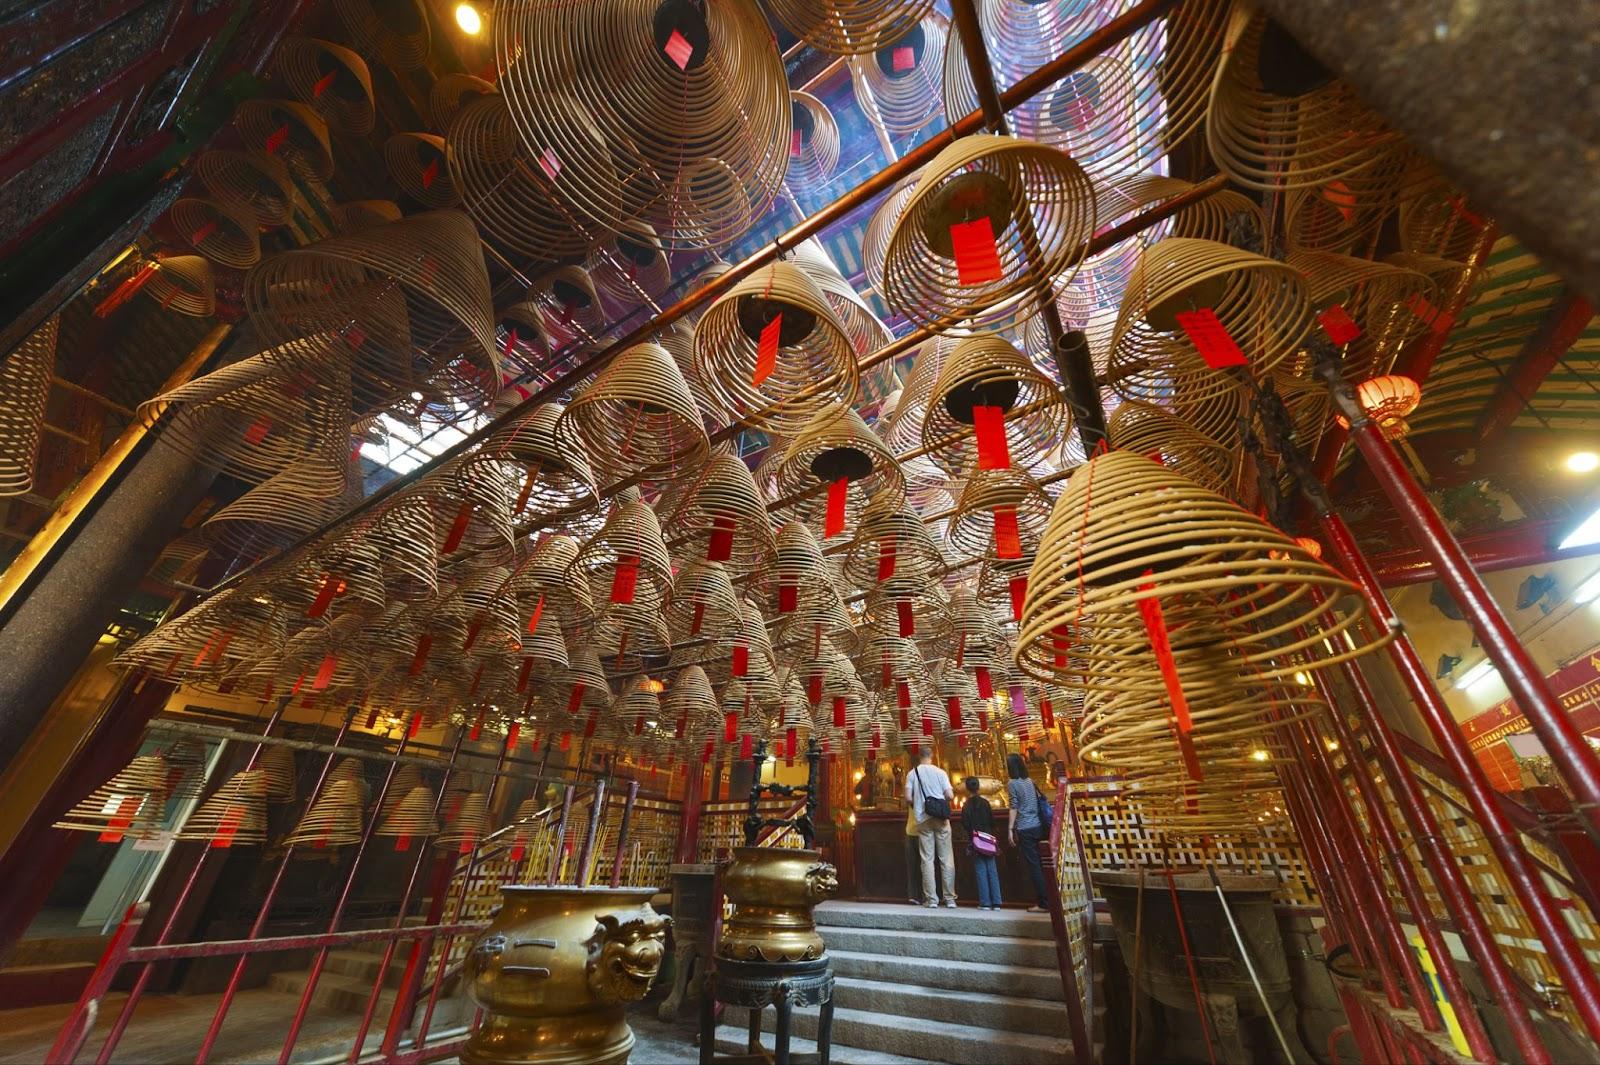 The interior of the Man Mo Temple, Hong Kong, with incense offer.